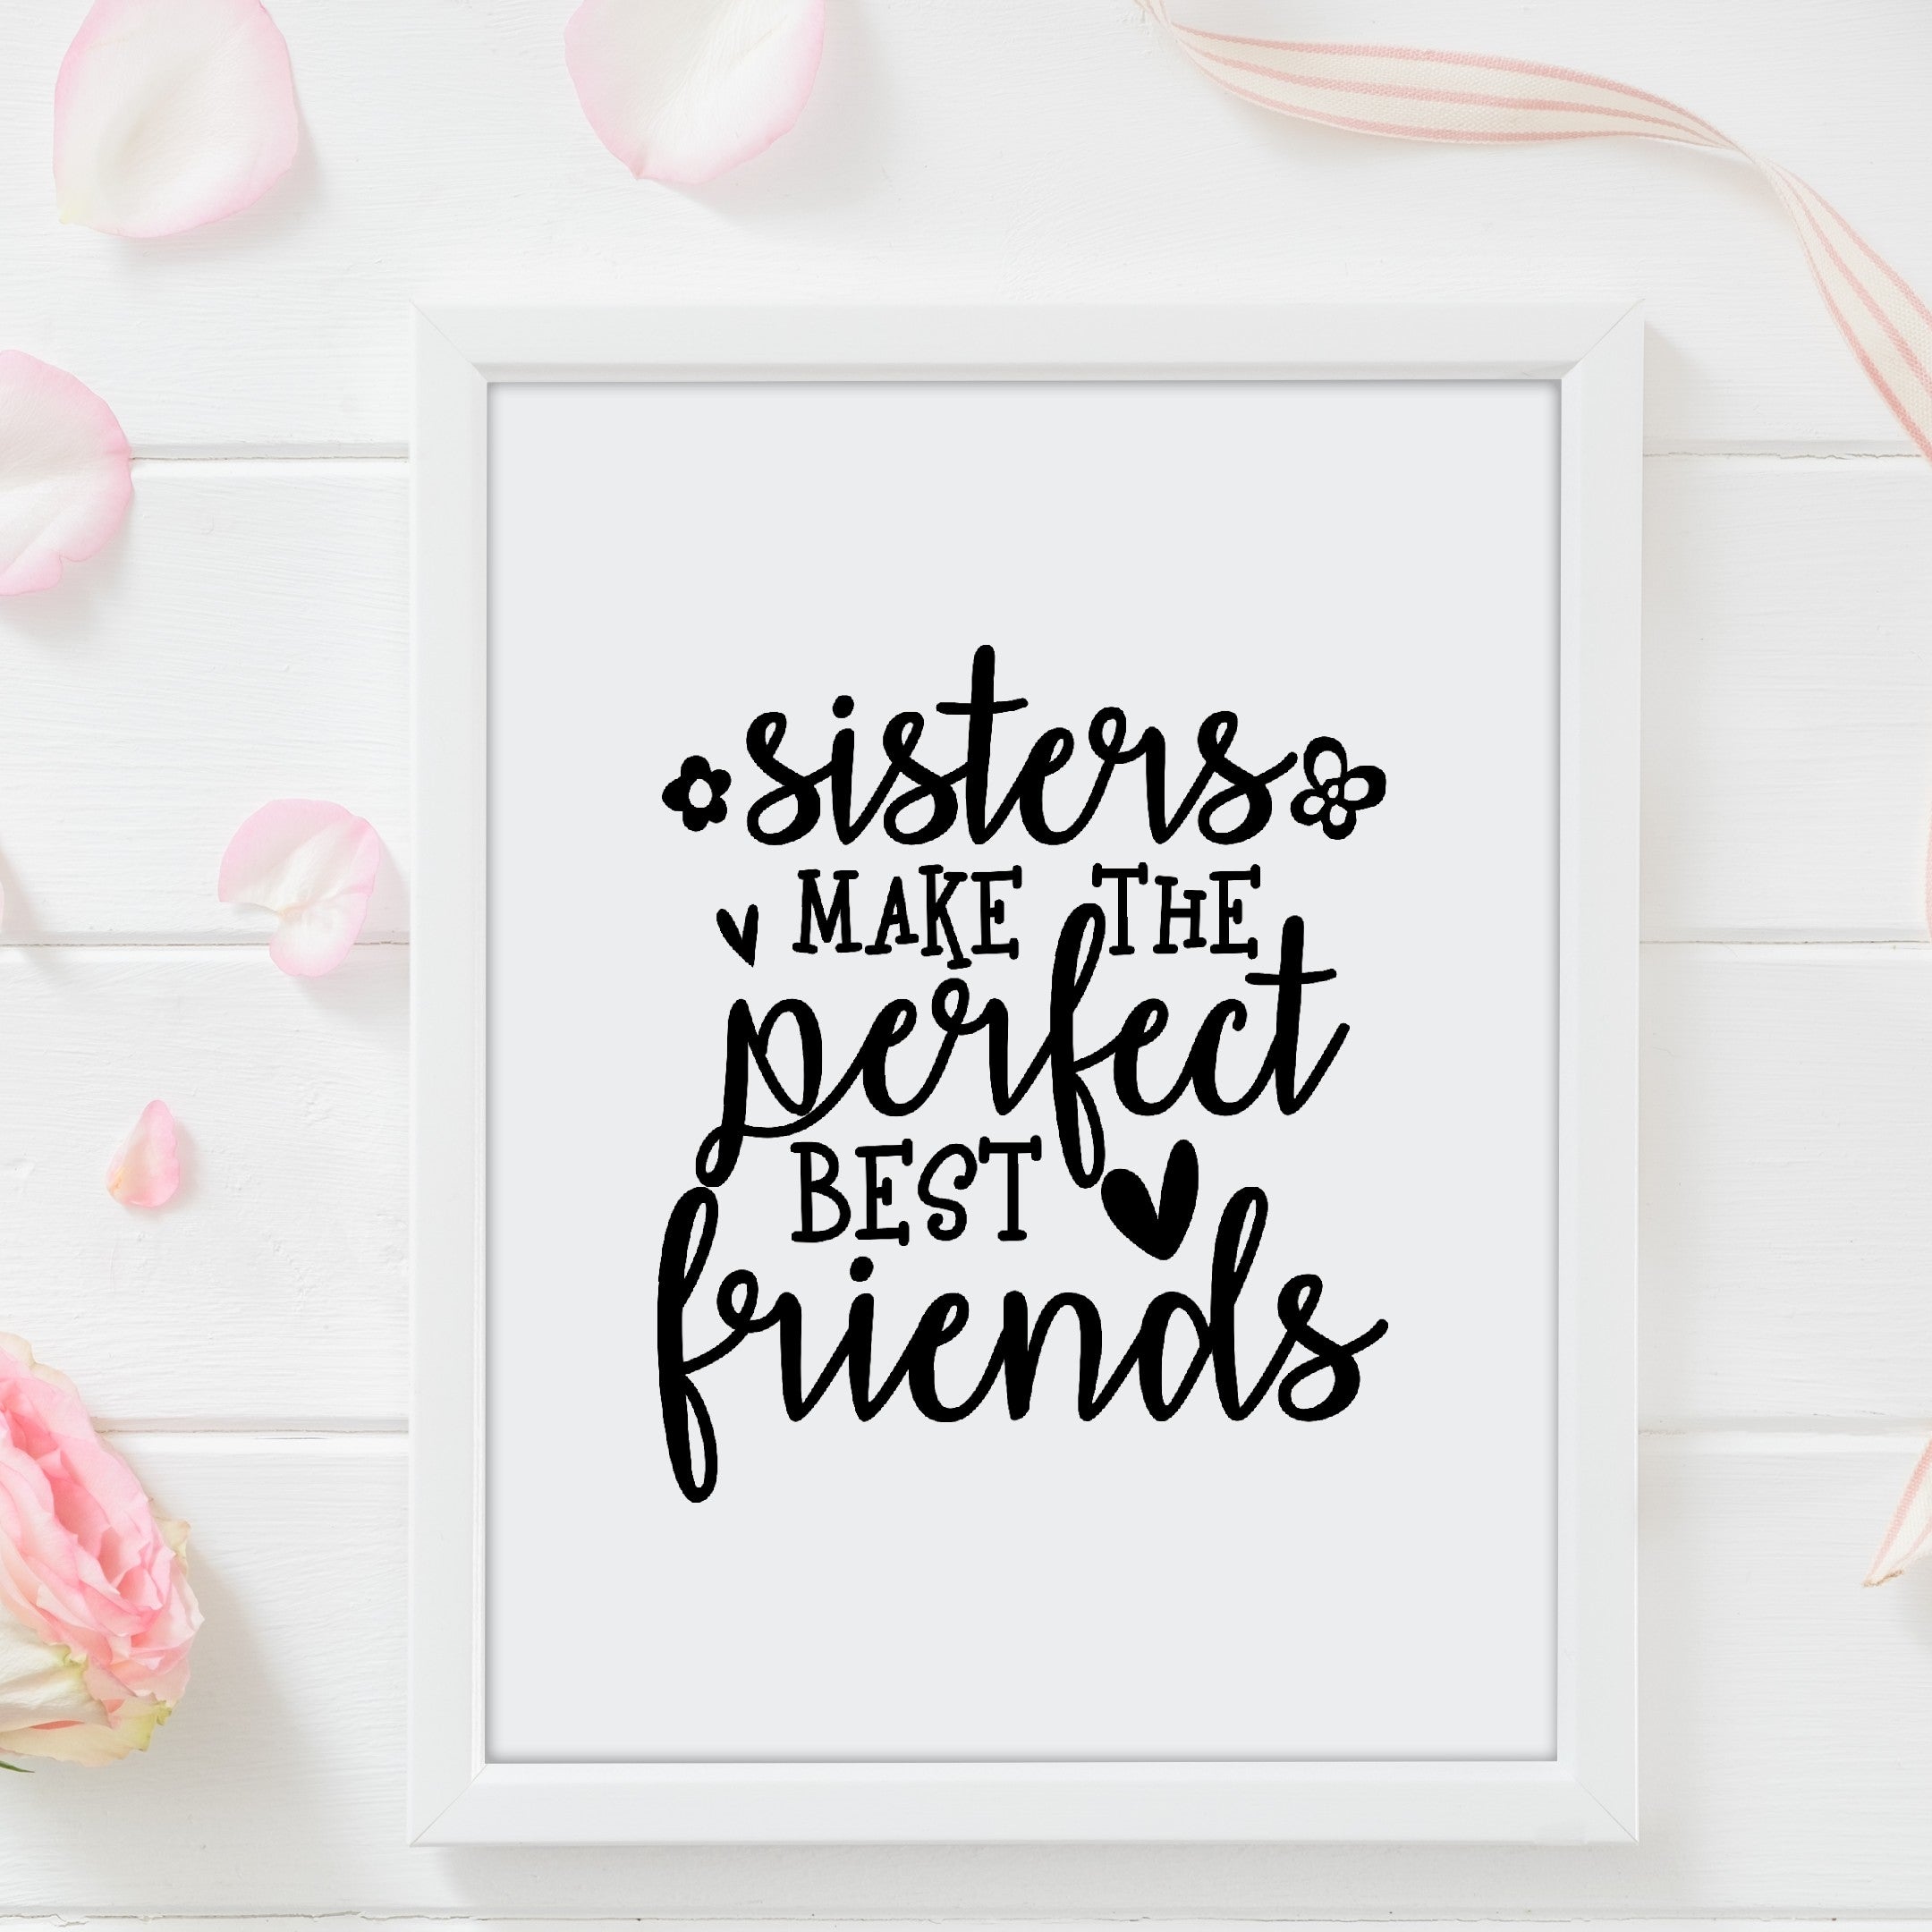 cheryl swales recommends Best Friends Sister